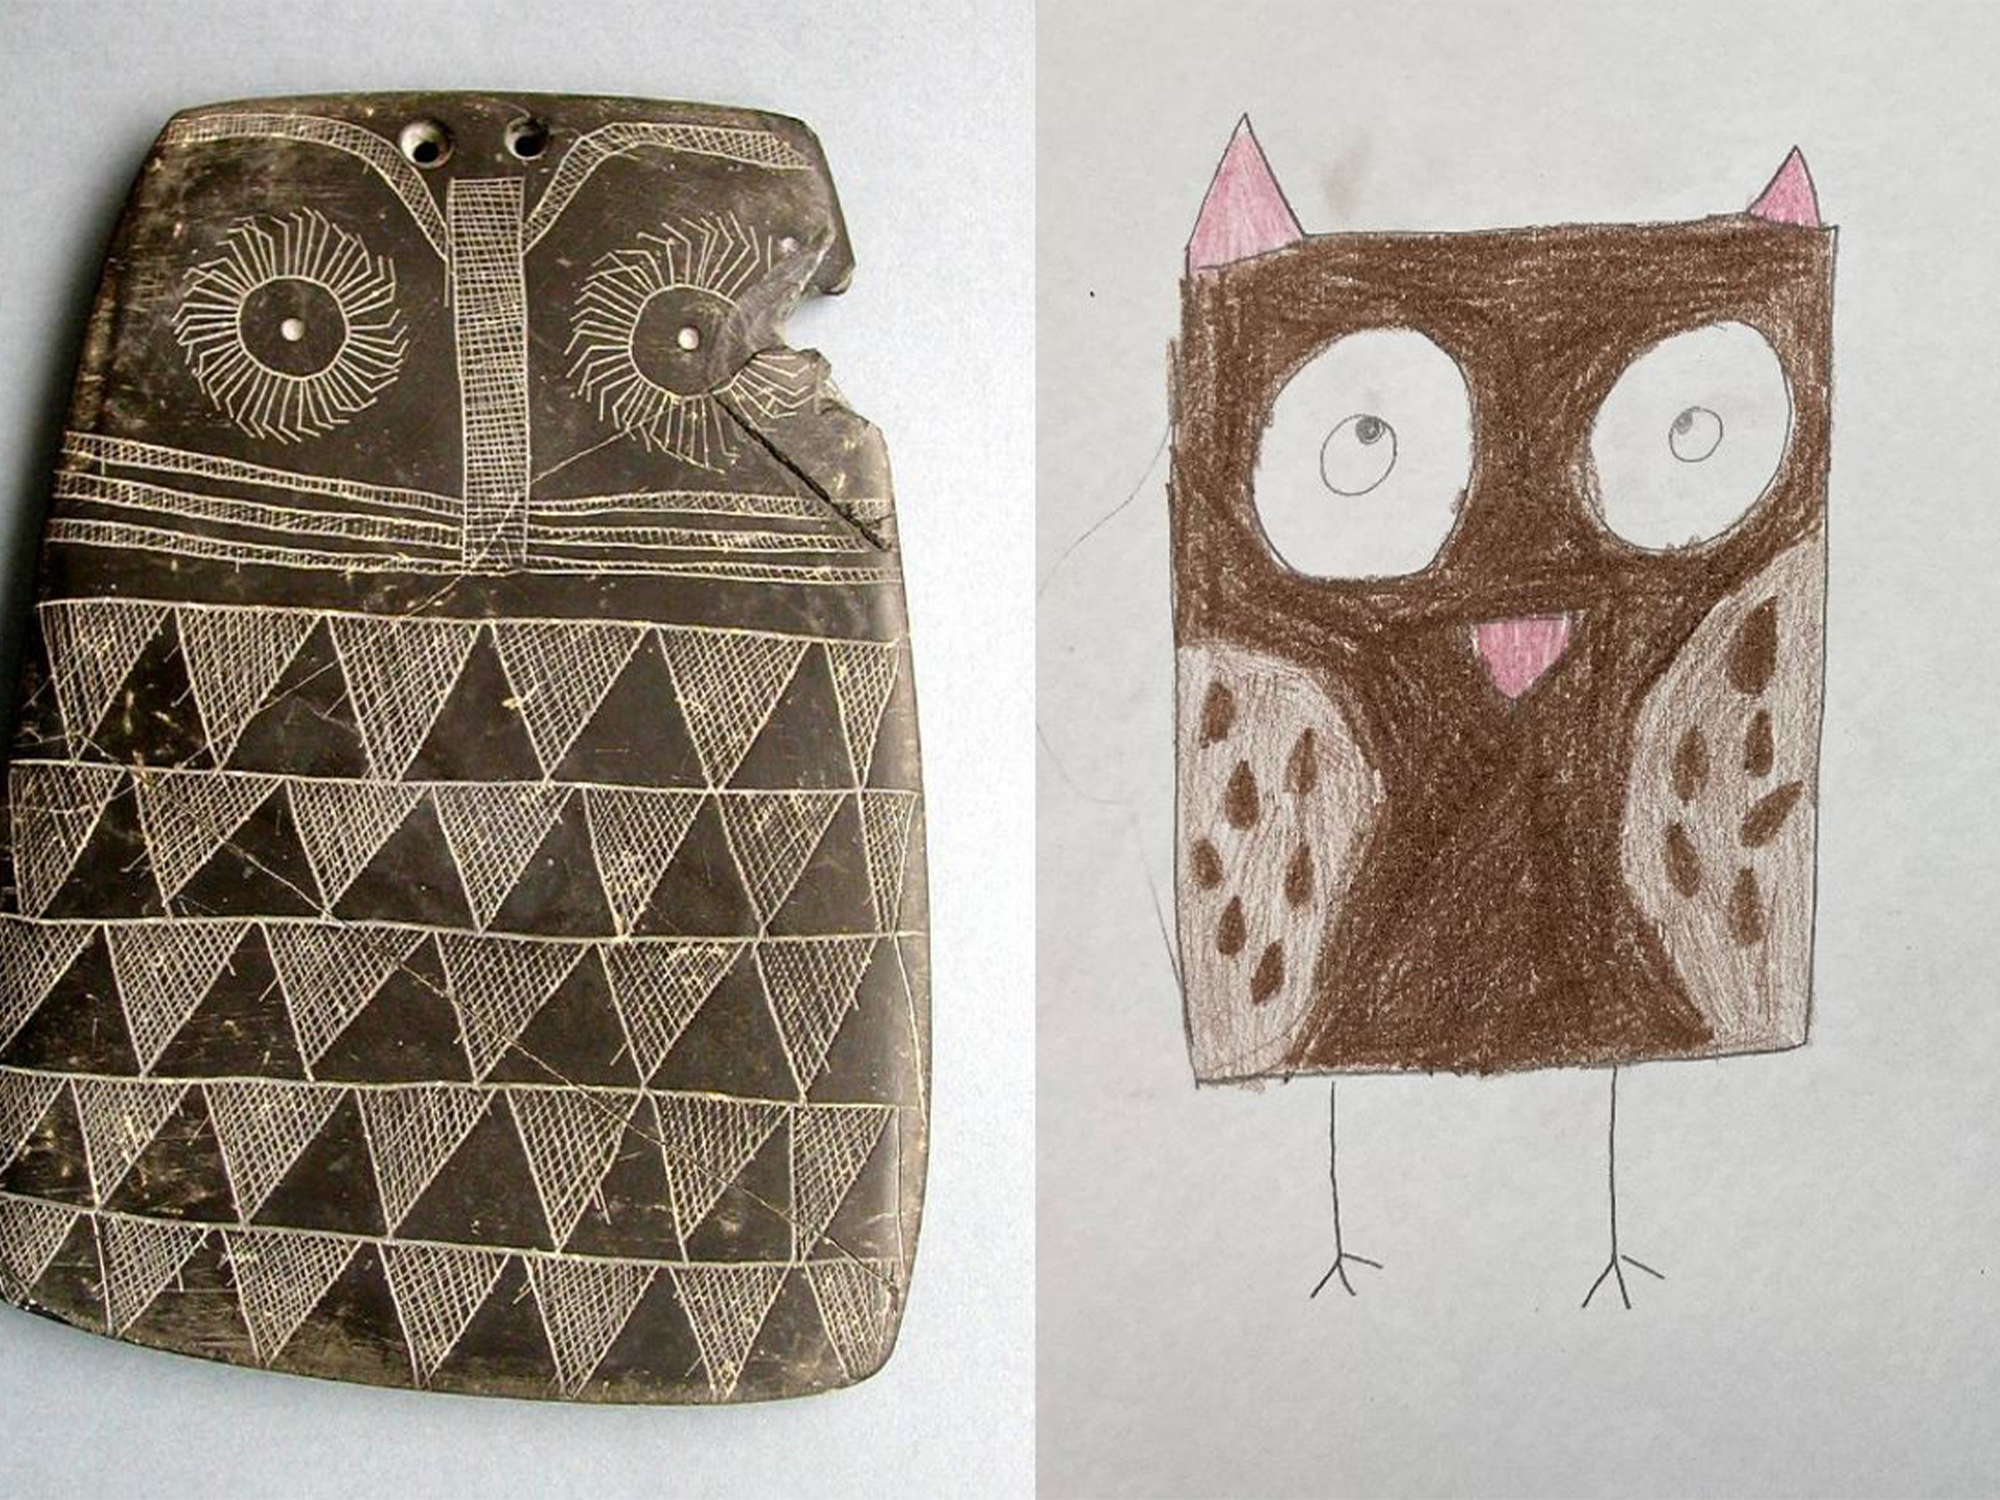 For thousands of years, kids have been fascinated with owls